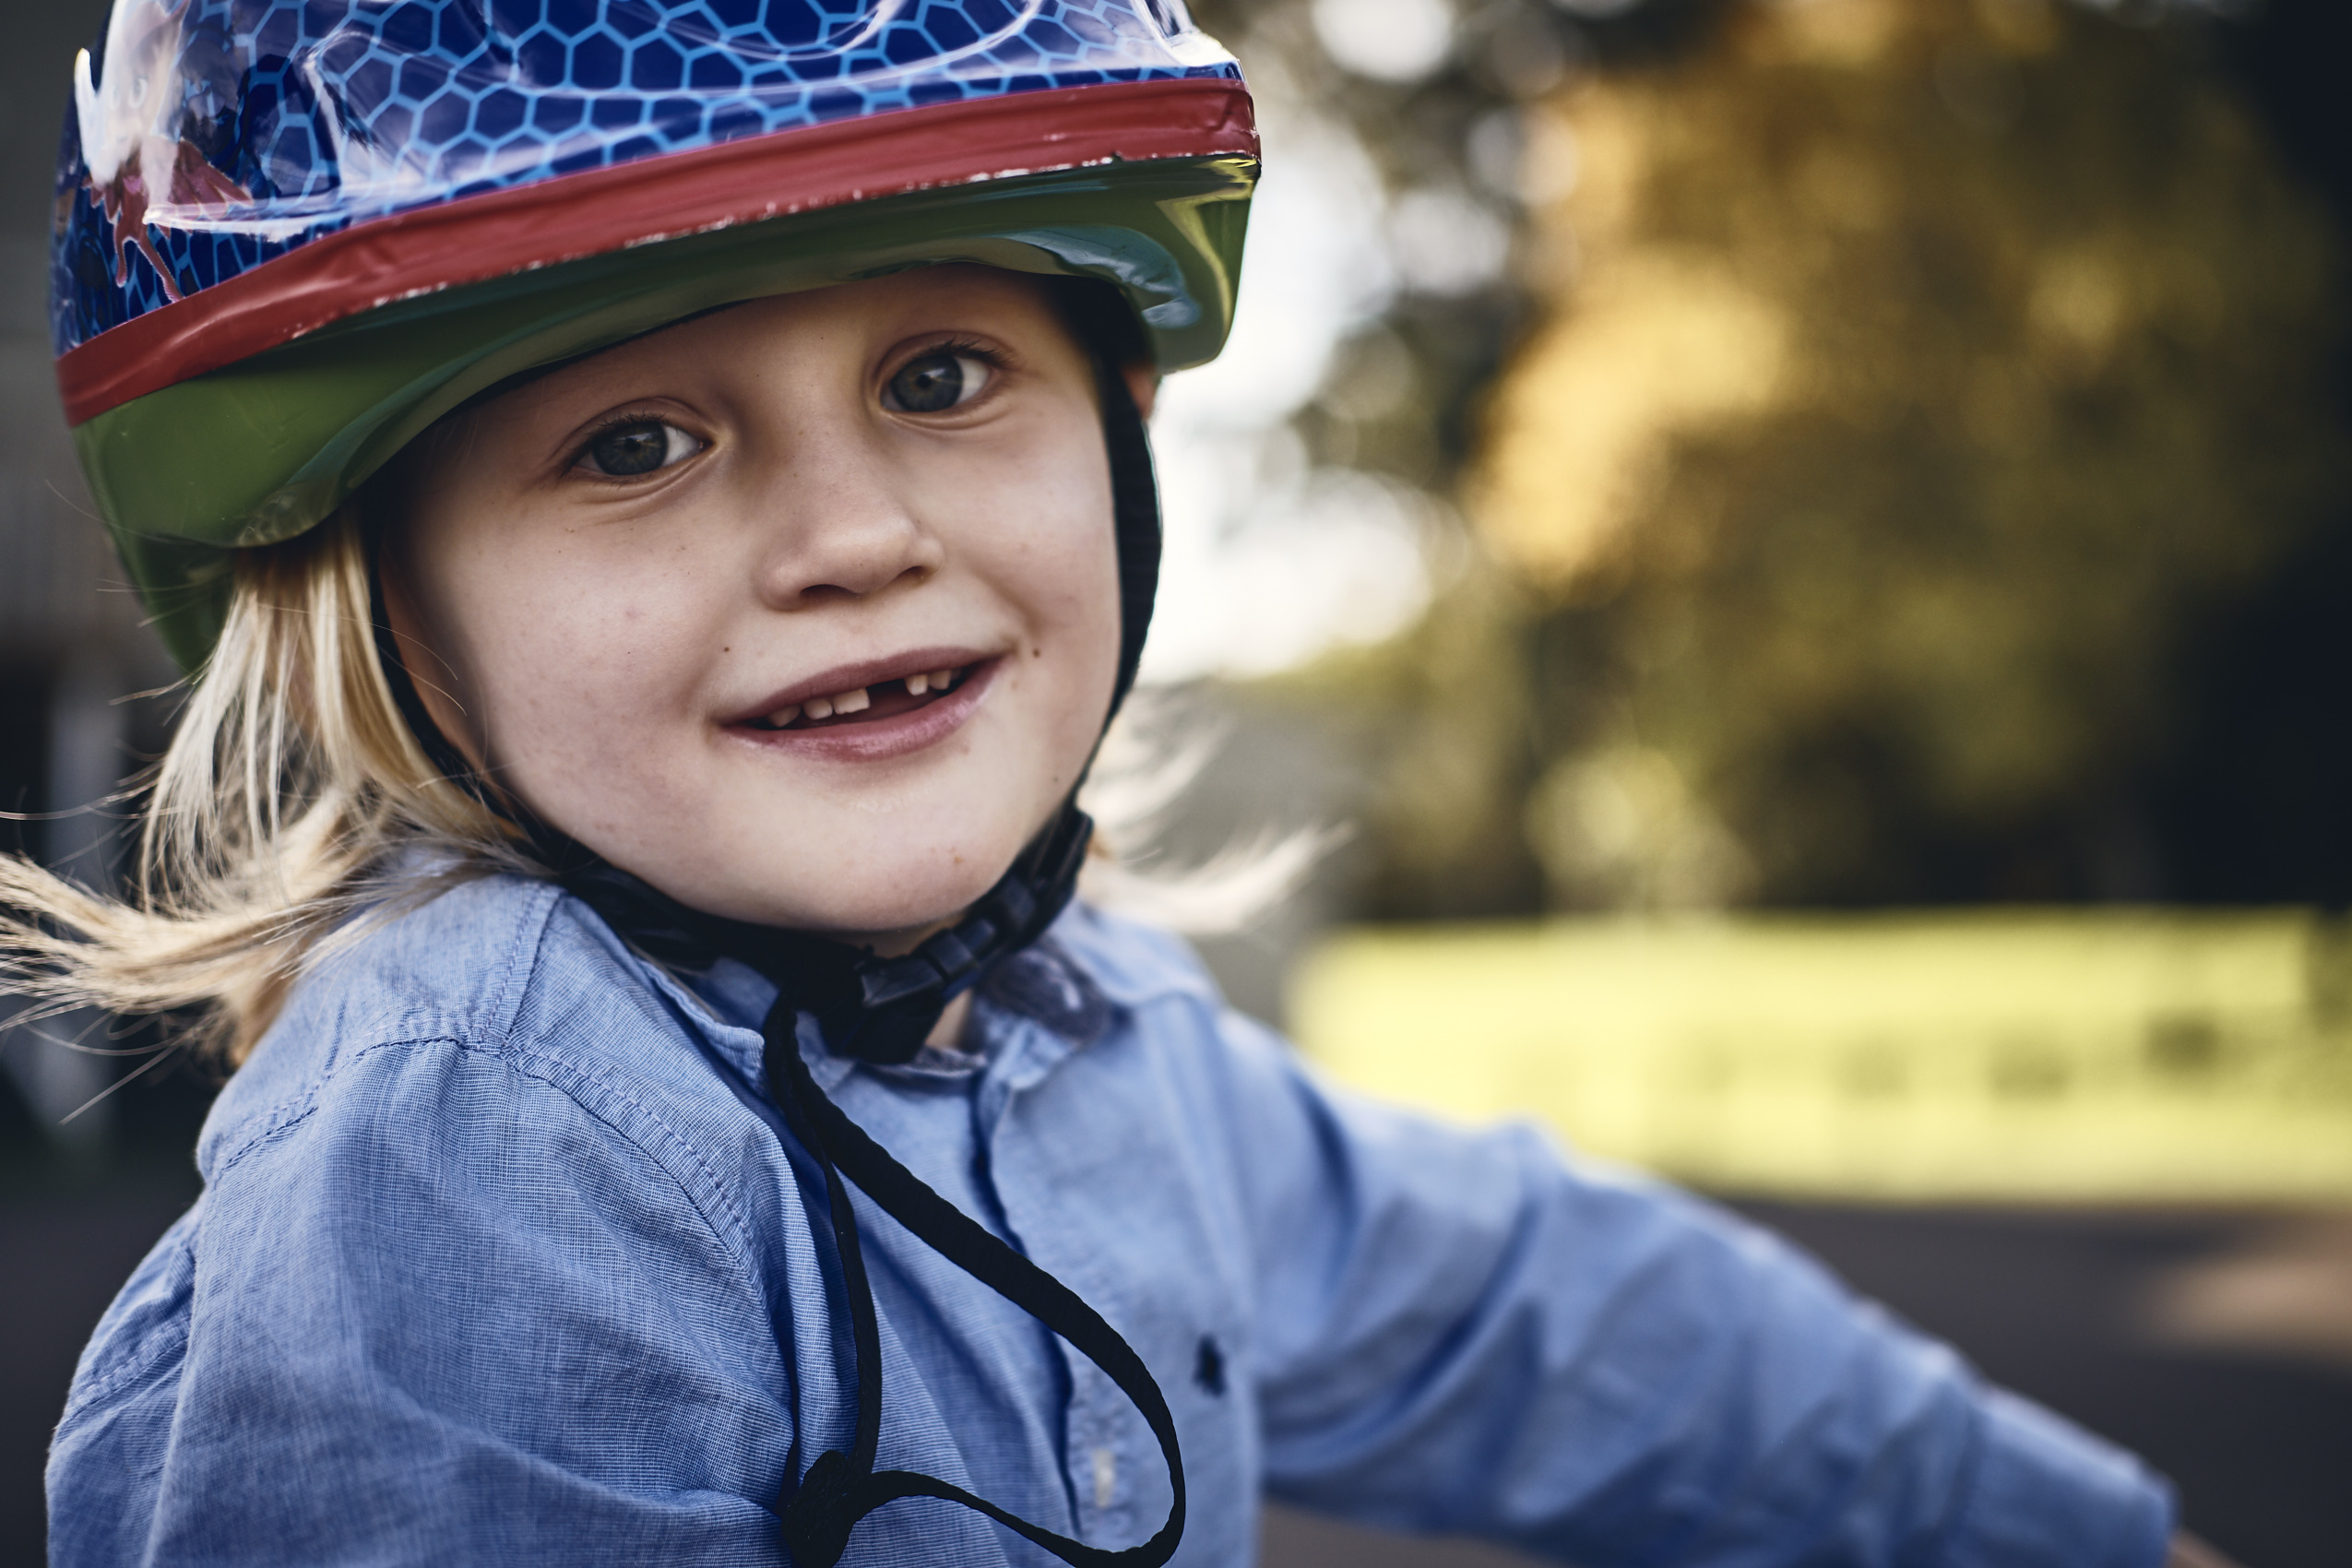 Lockdown • Young Boy Outside in Bicycle Helmet • Lifestyle & Portrait Photography